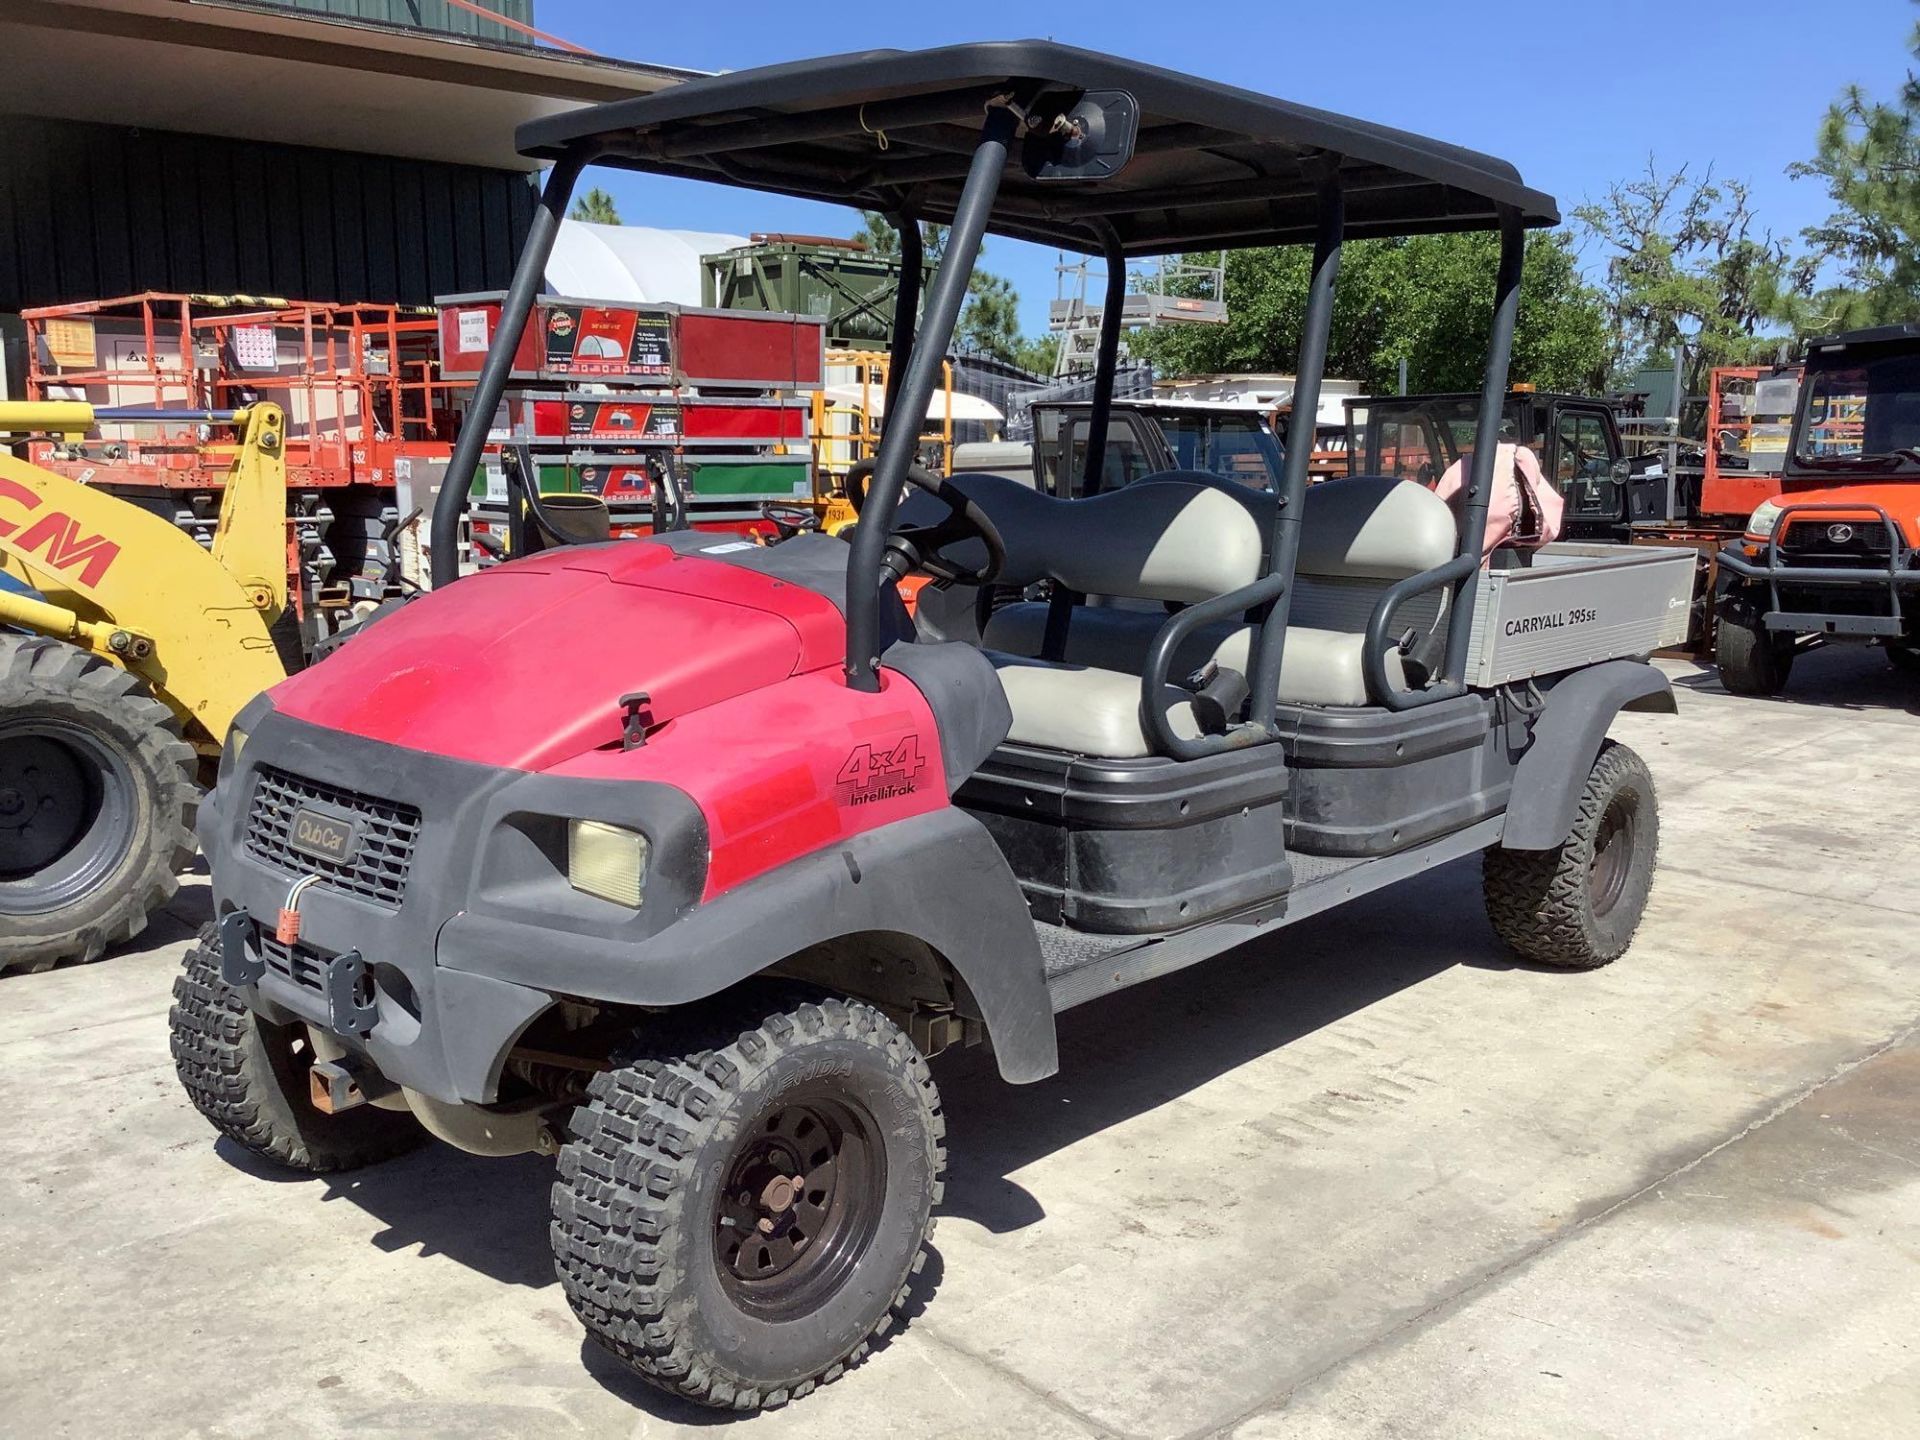 CLUB CAR CARYALL 295SE 4x4 INTELLITRAK GOLF CART, GAS POWERED , MANUAL DUMP BED, HITCH IN FRONT & BA